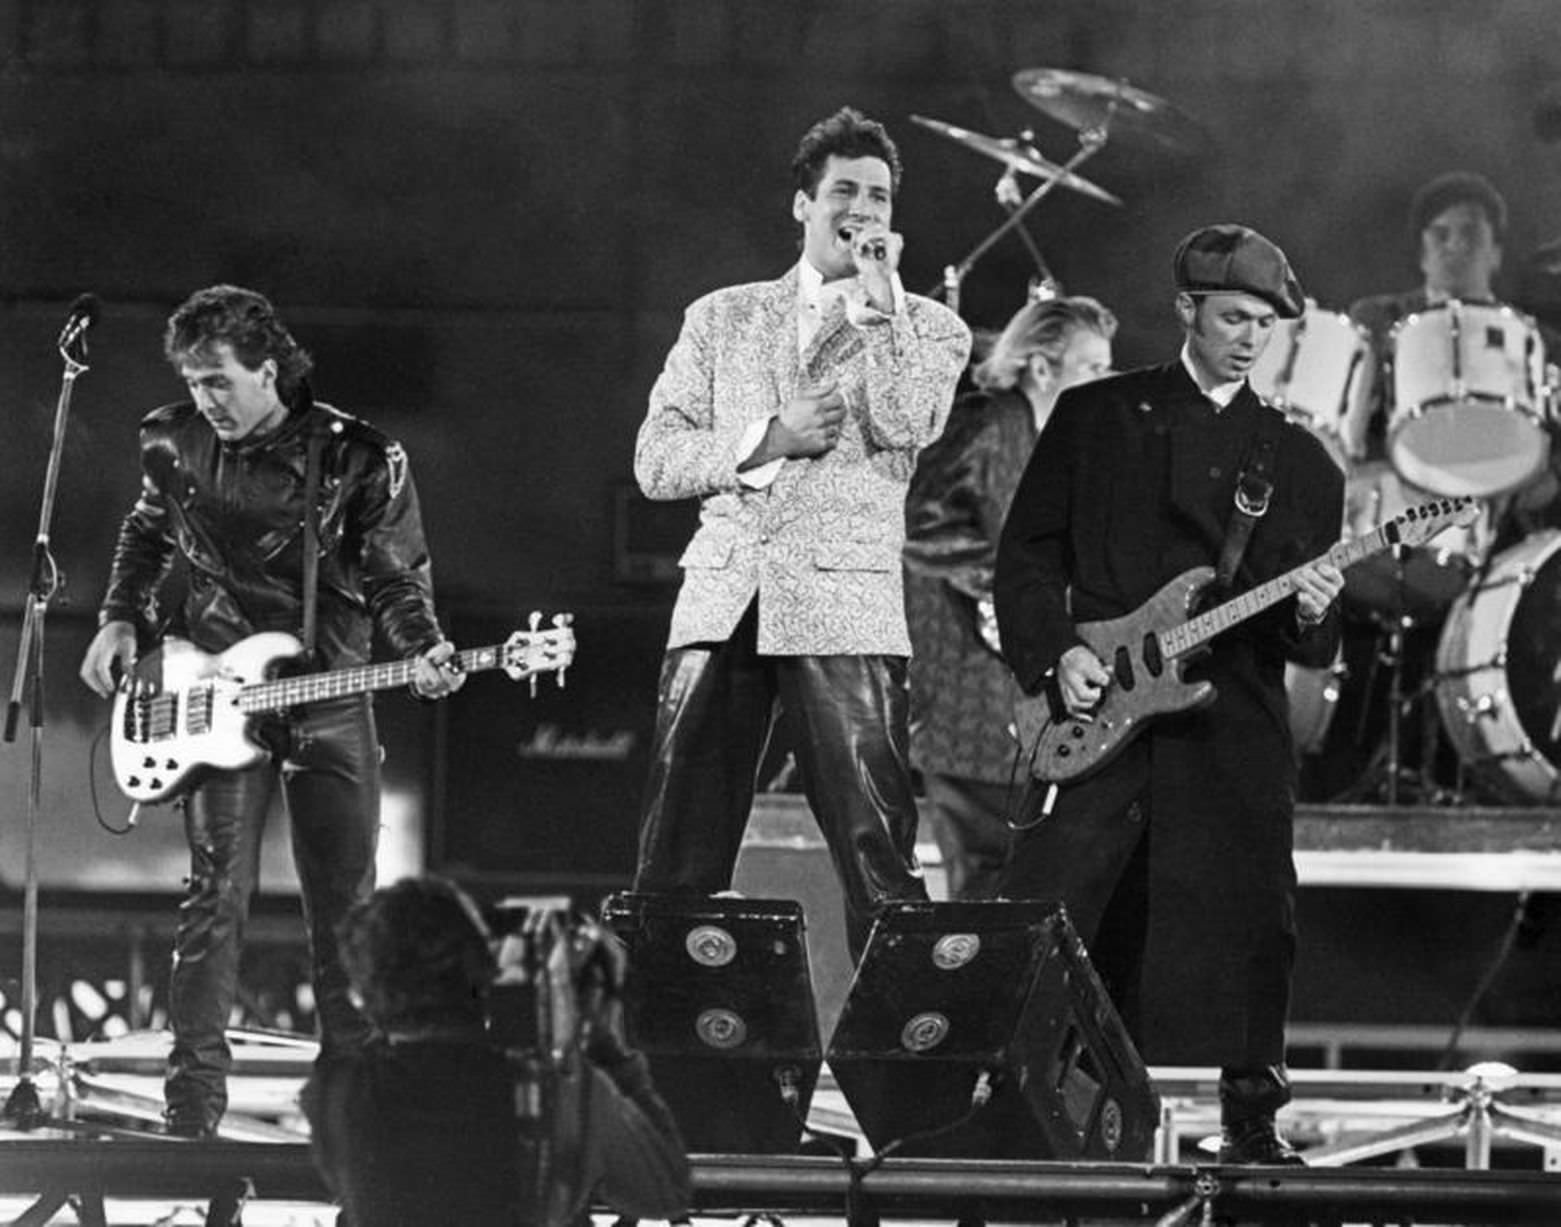 Spandau Ballet perform at Rock Around The Dock in Liverpool, 31st July 1986